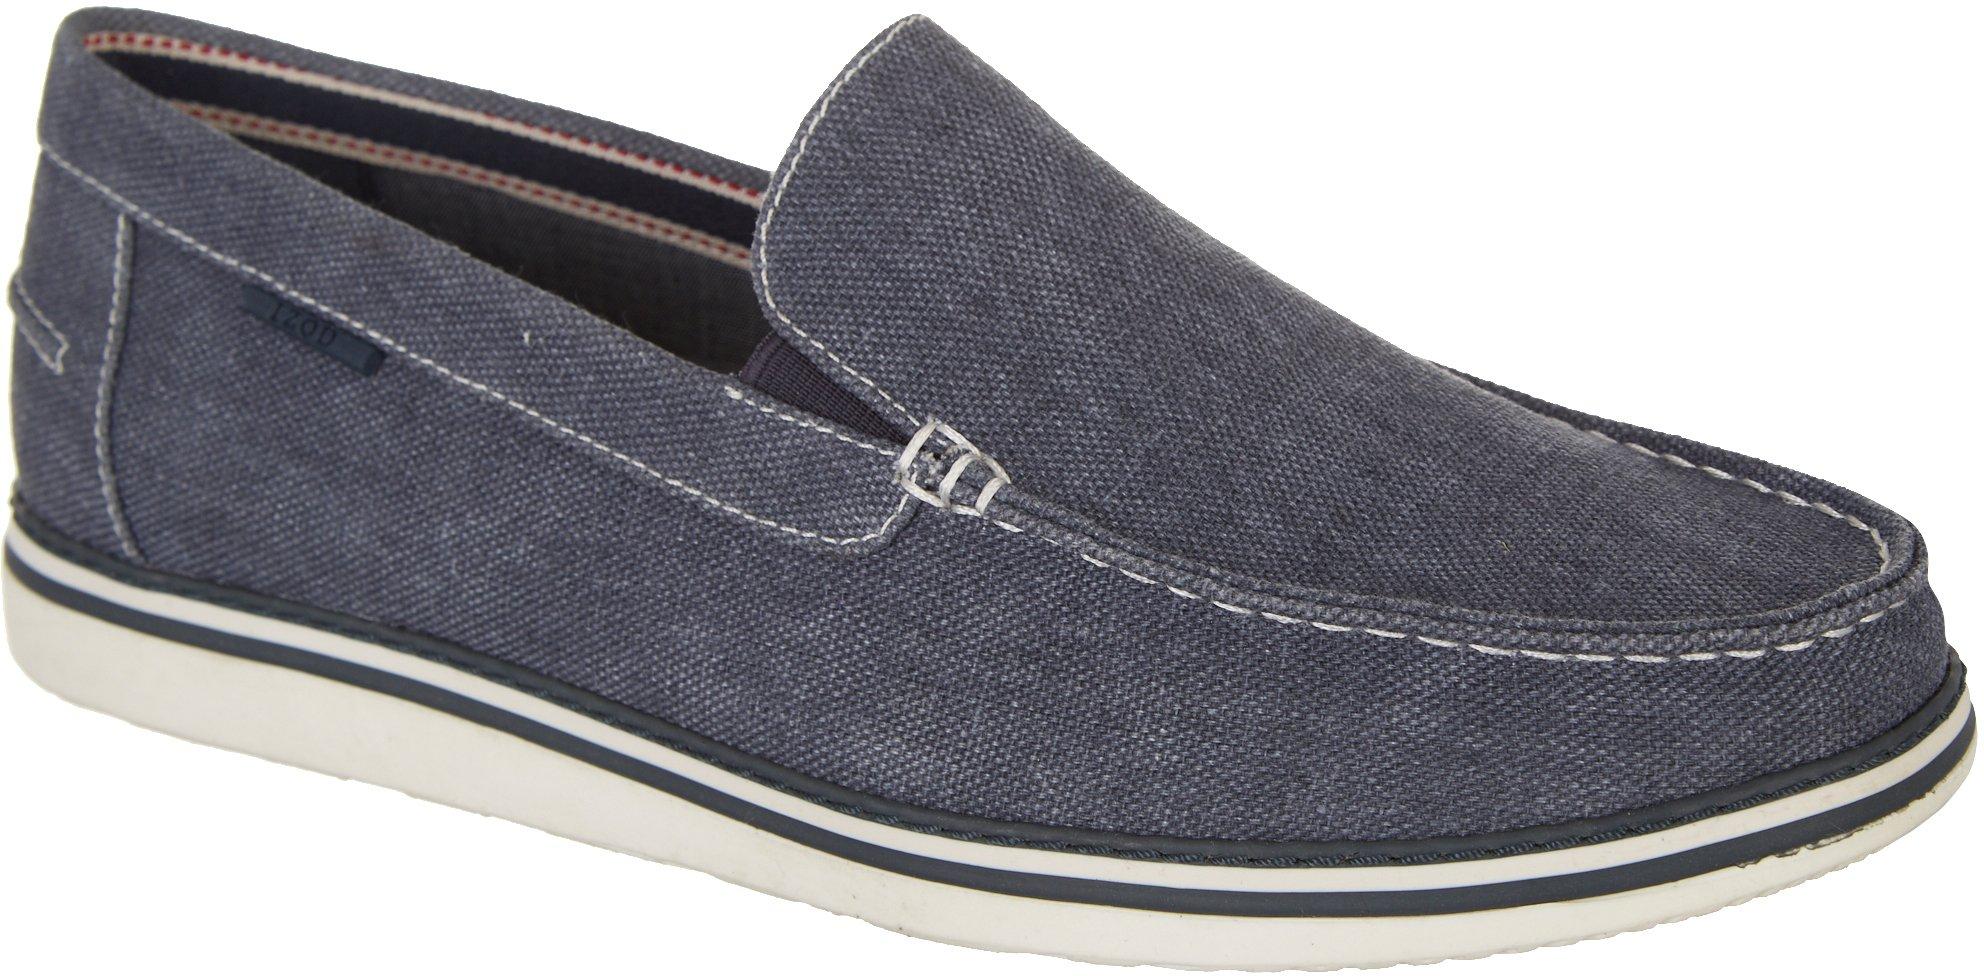 izod casual shoes